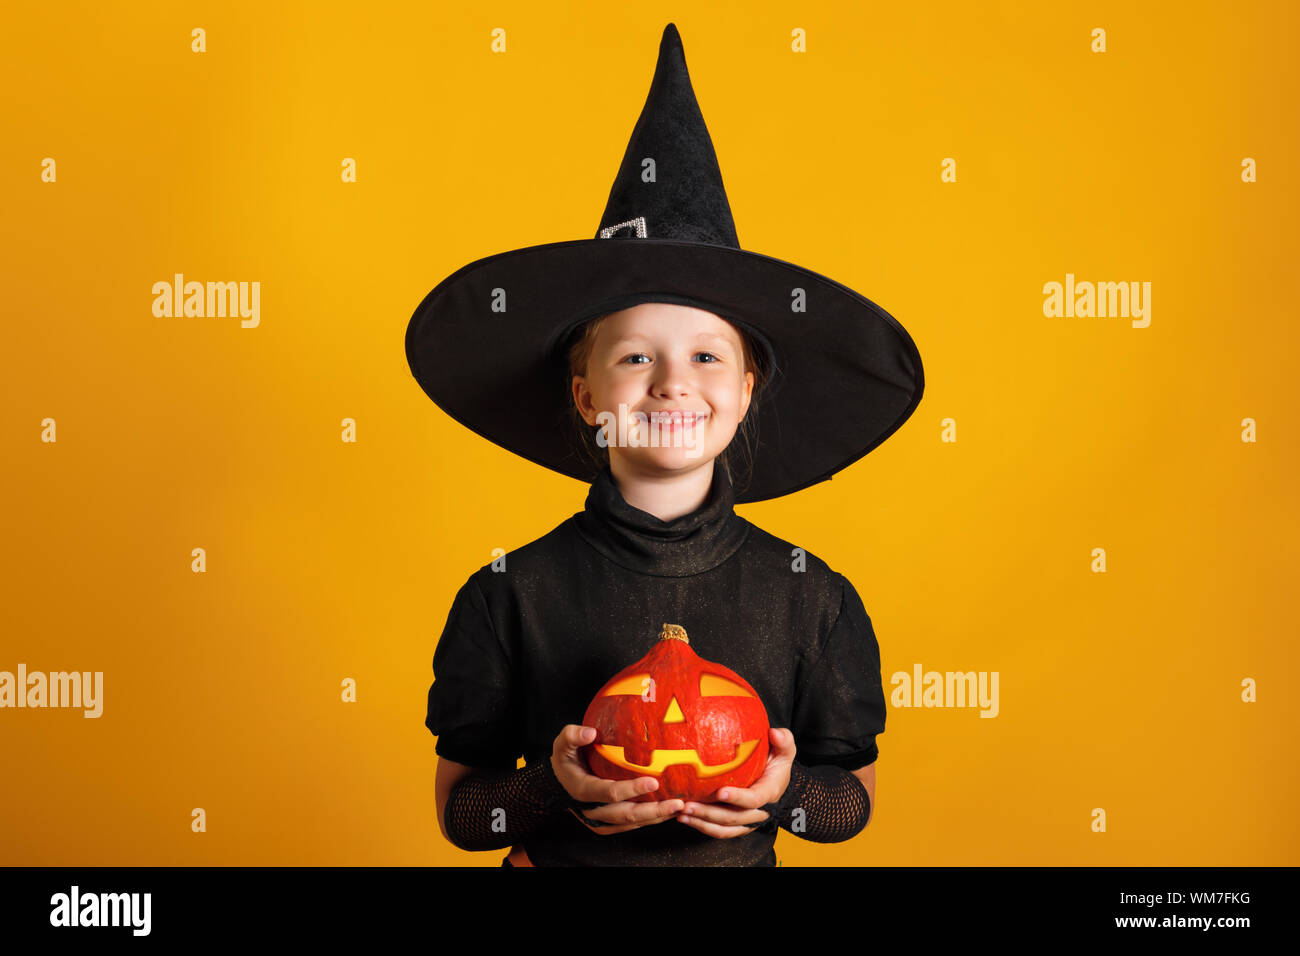 Cute little girl dressed in a witch costume holds a pumpkin jack lantern on a yellow background. Halloween celebration. Stock Photo